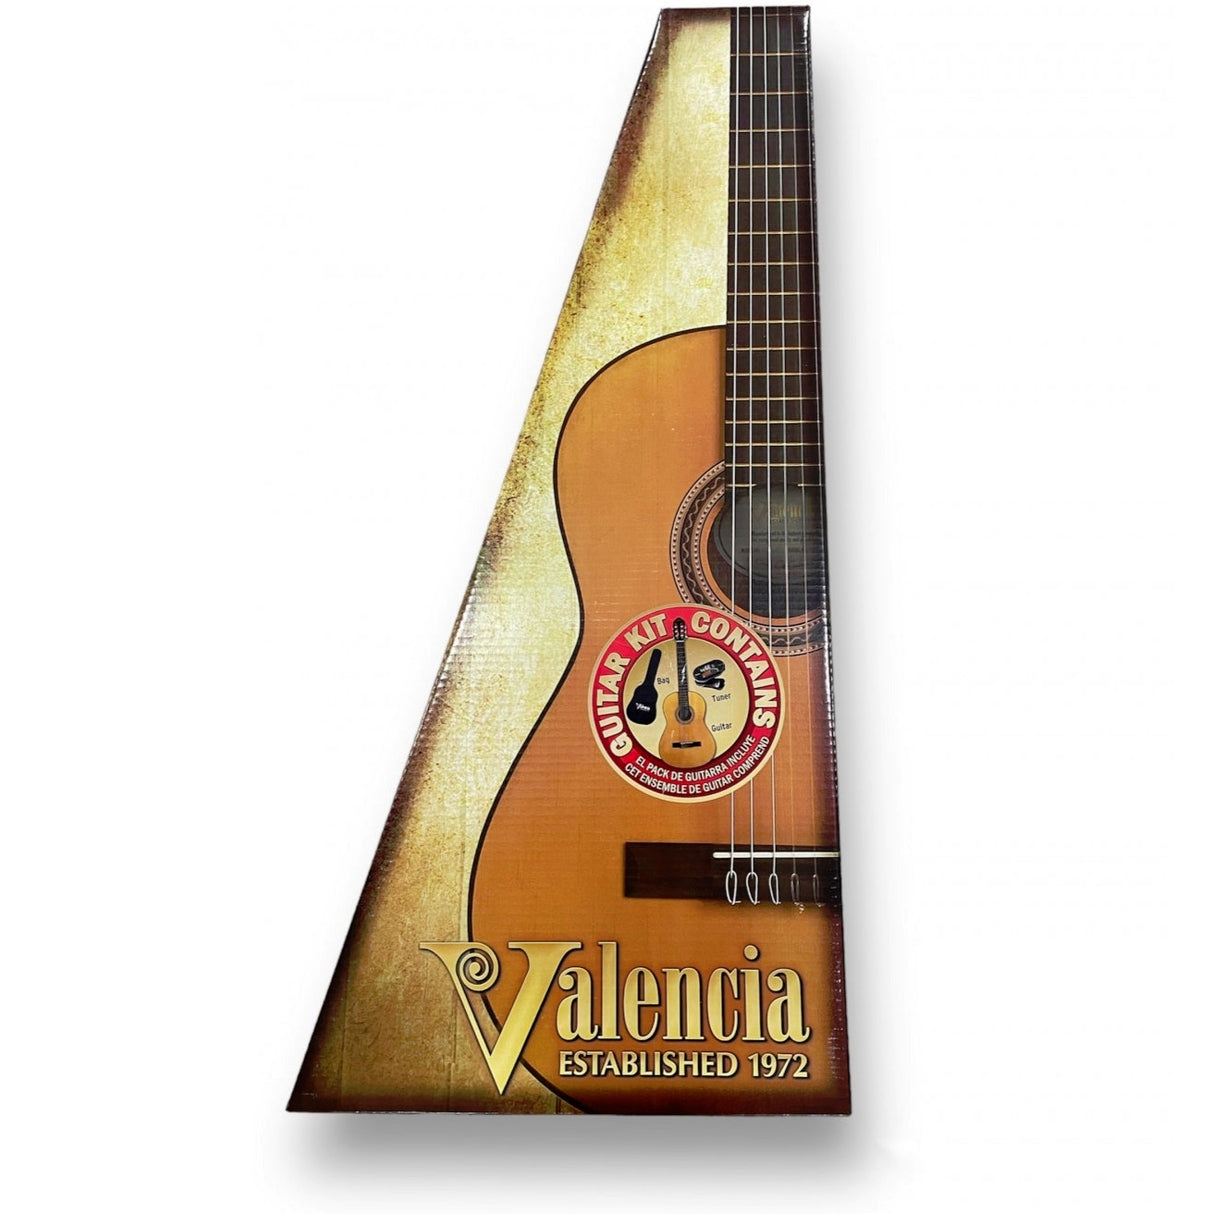 Valencia 3/4 Classical Guitar With GigBag & Tuner